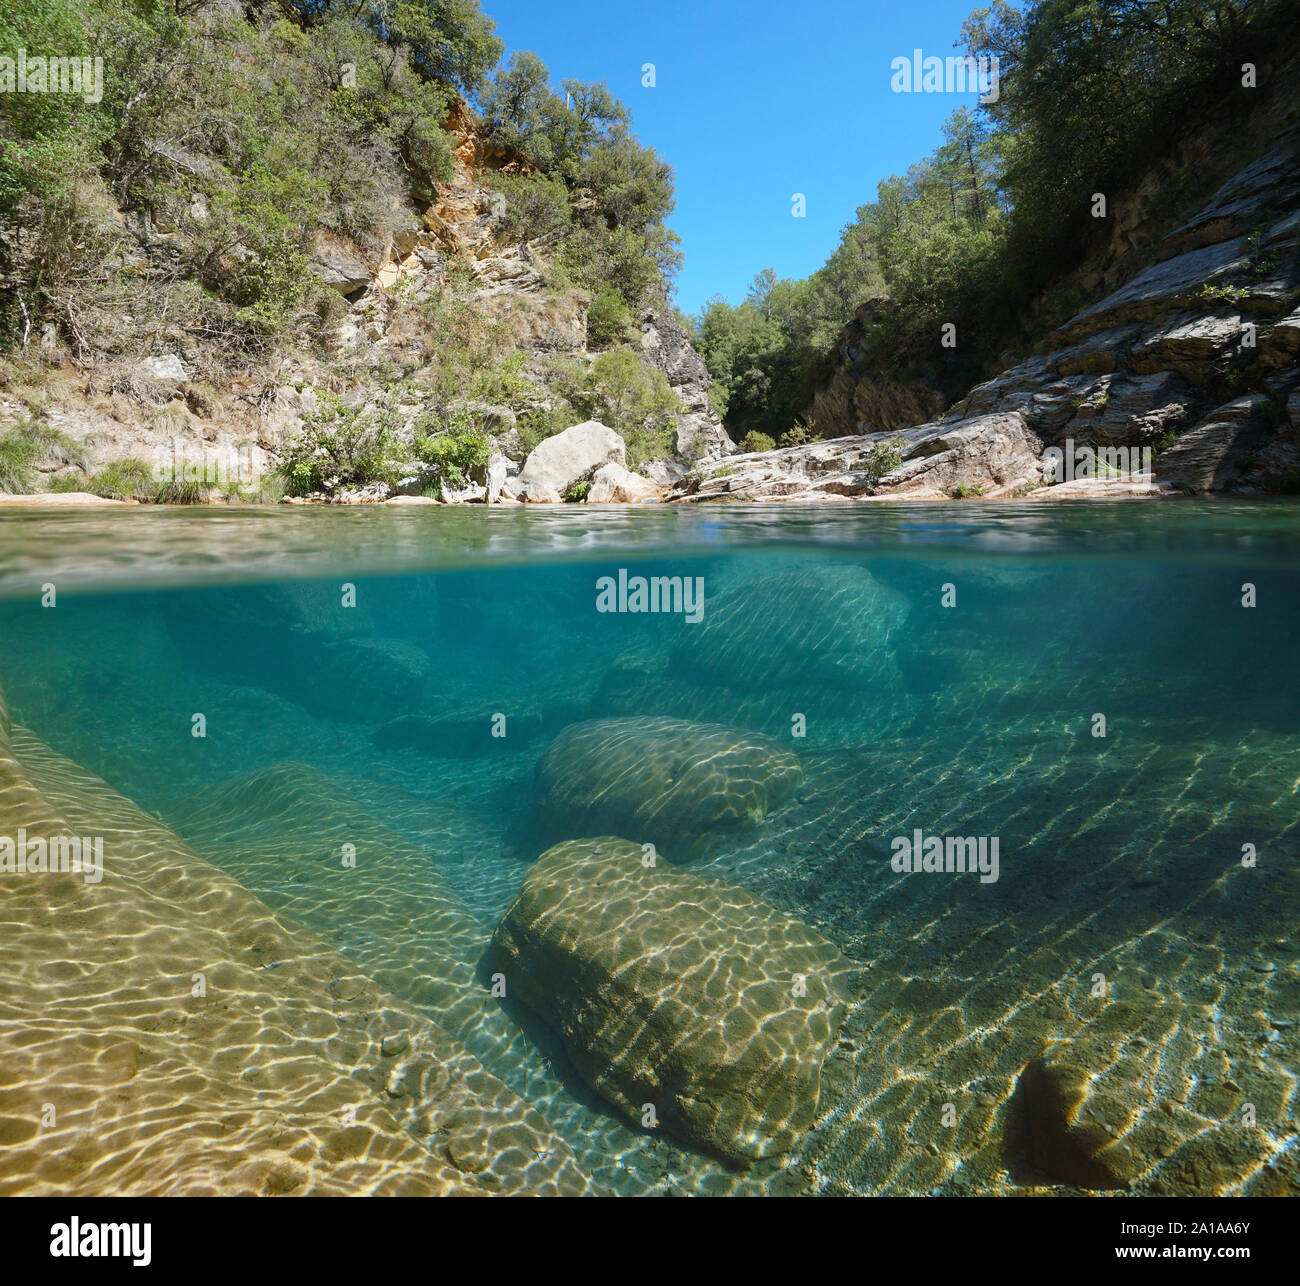 Wild rocky river with clear water landscape, split view over and under water surface, Spain, La Muga, Catalonia Stock Photo